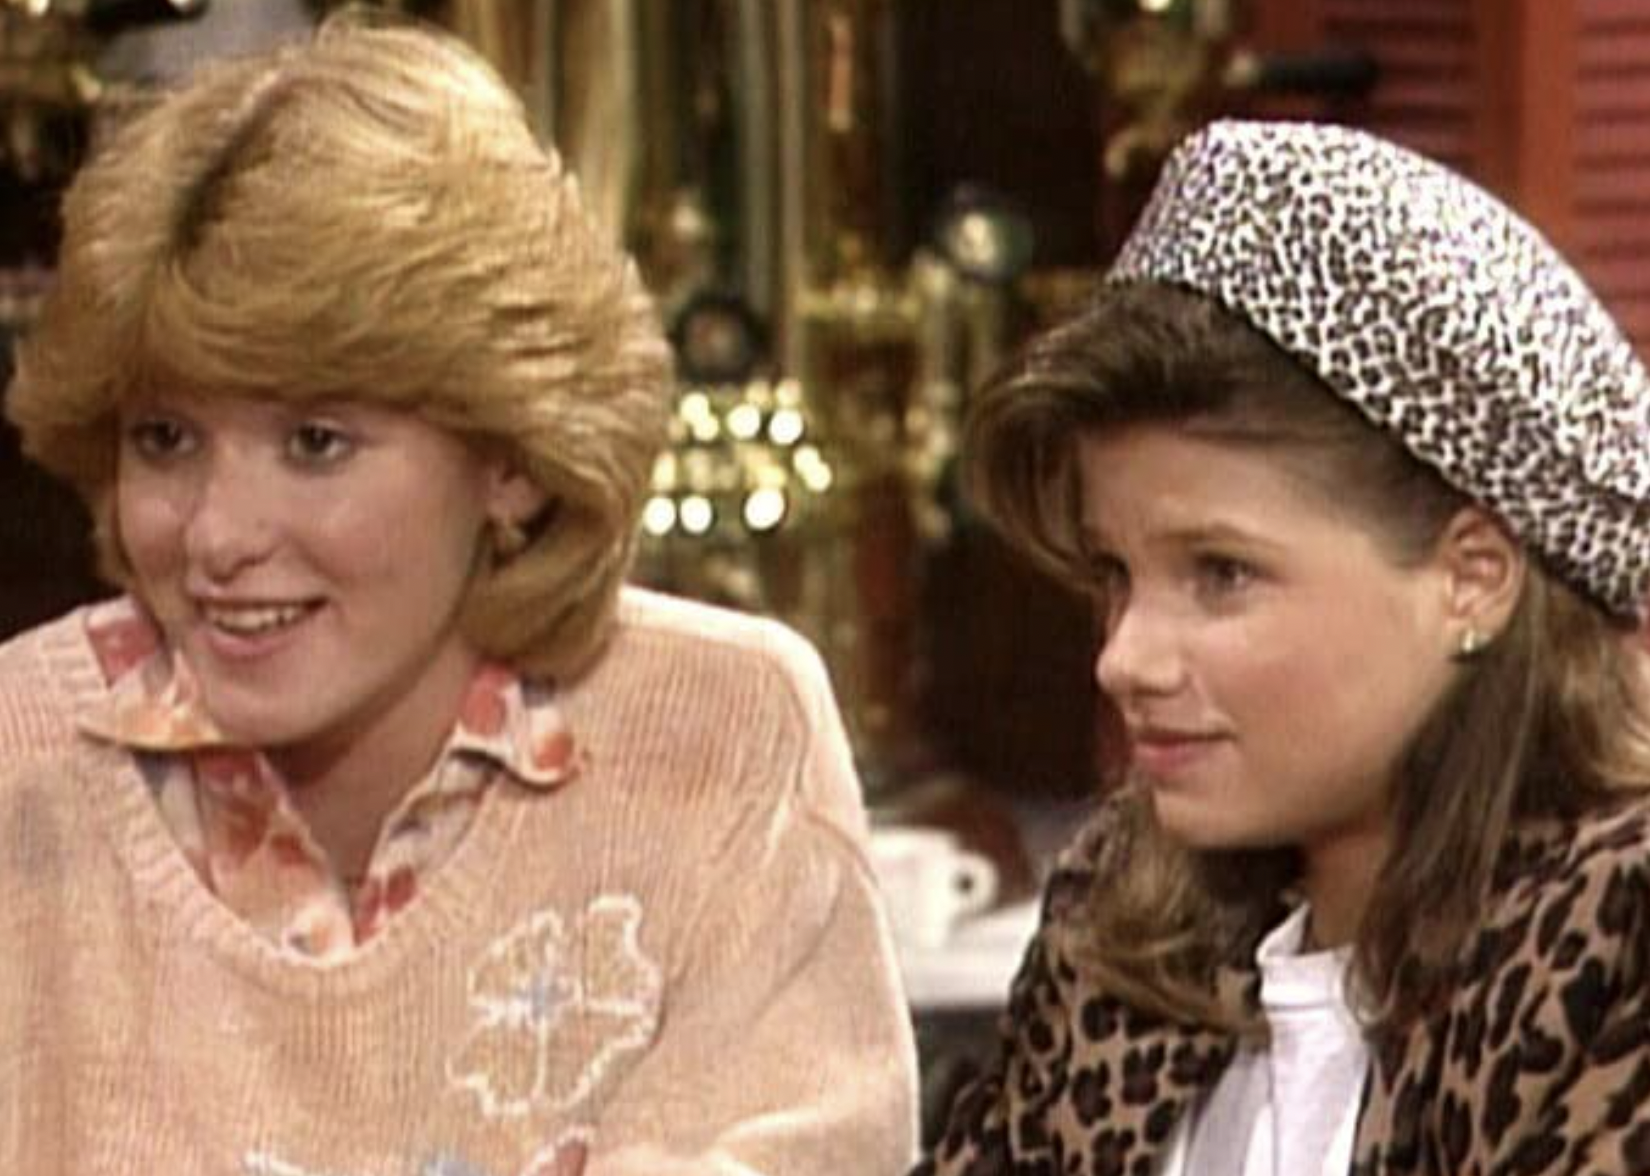 Ari Meyers and Allison Smith in "Kate & Allie"